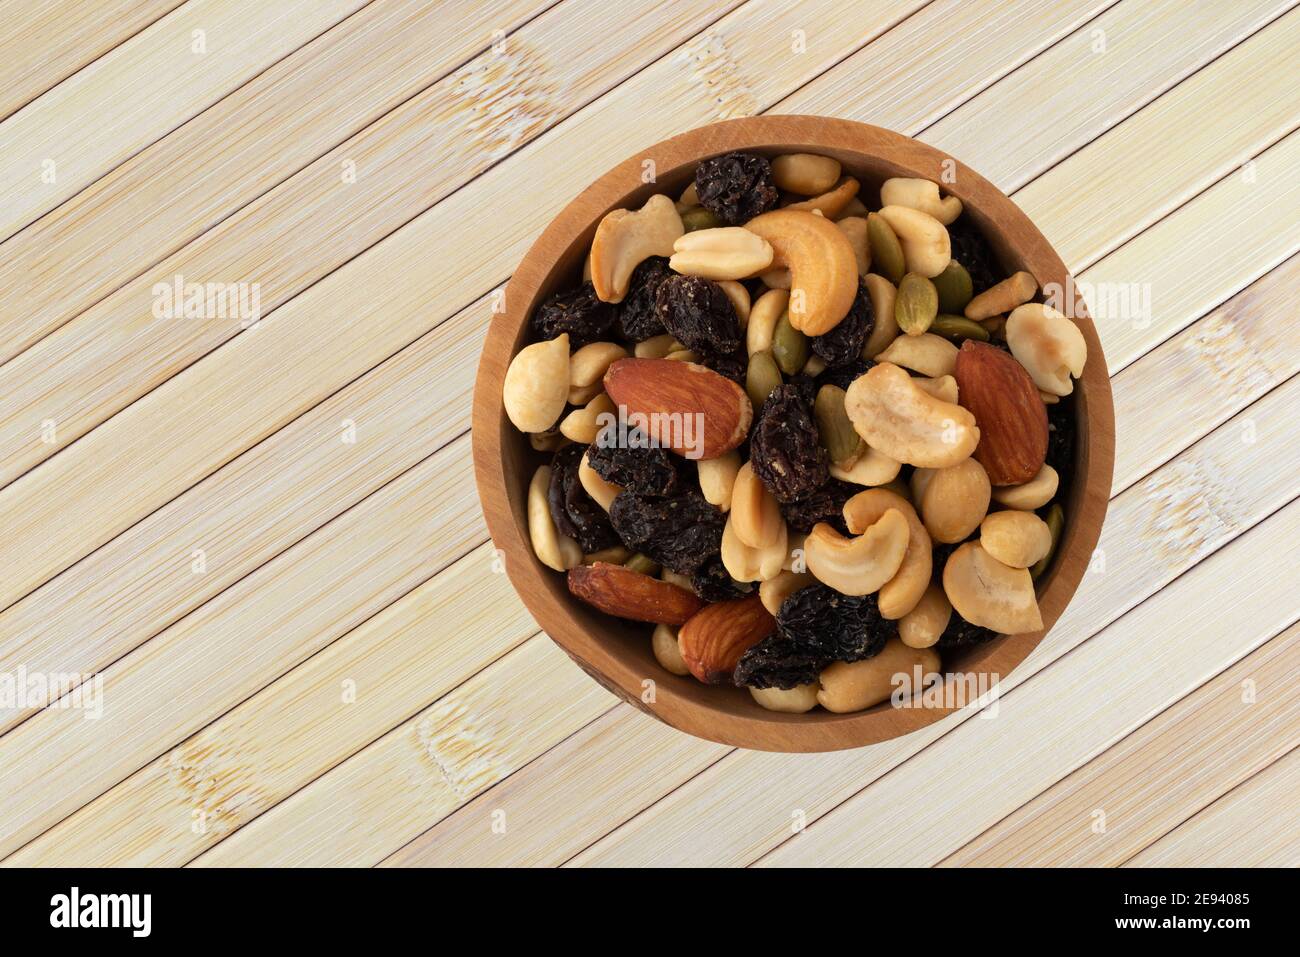 Top view of an assortment of nuts and dried fruit in a wood bowl atop a wood placemat. Stock Photo